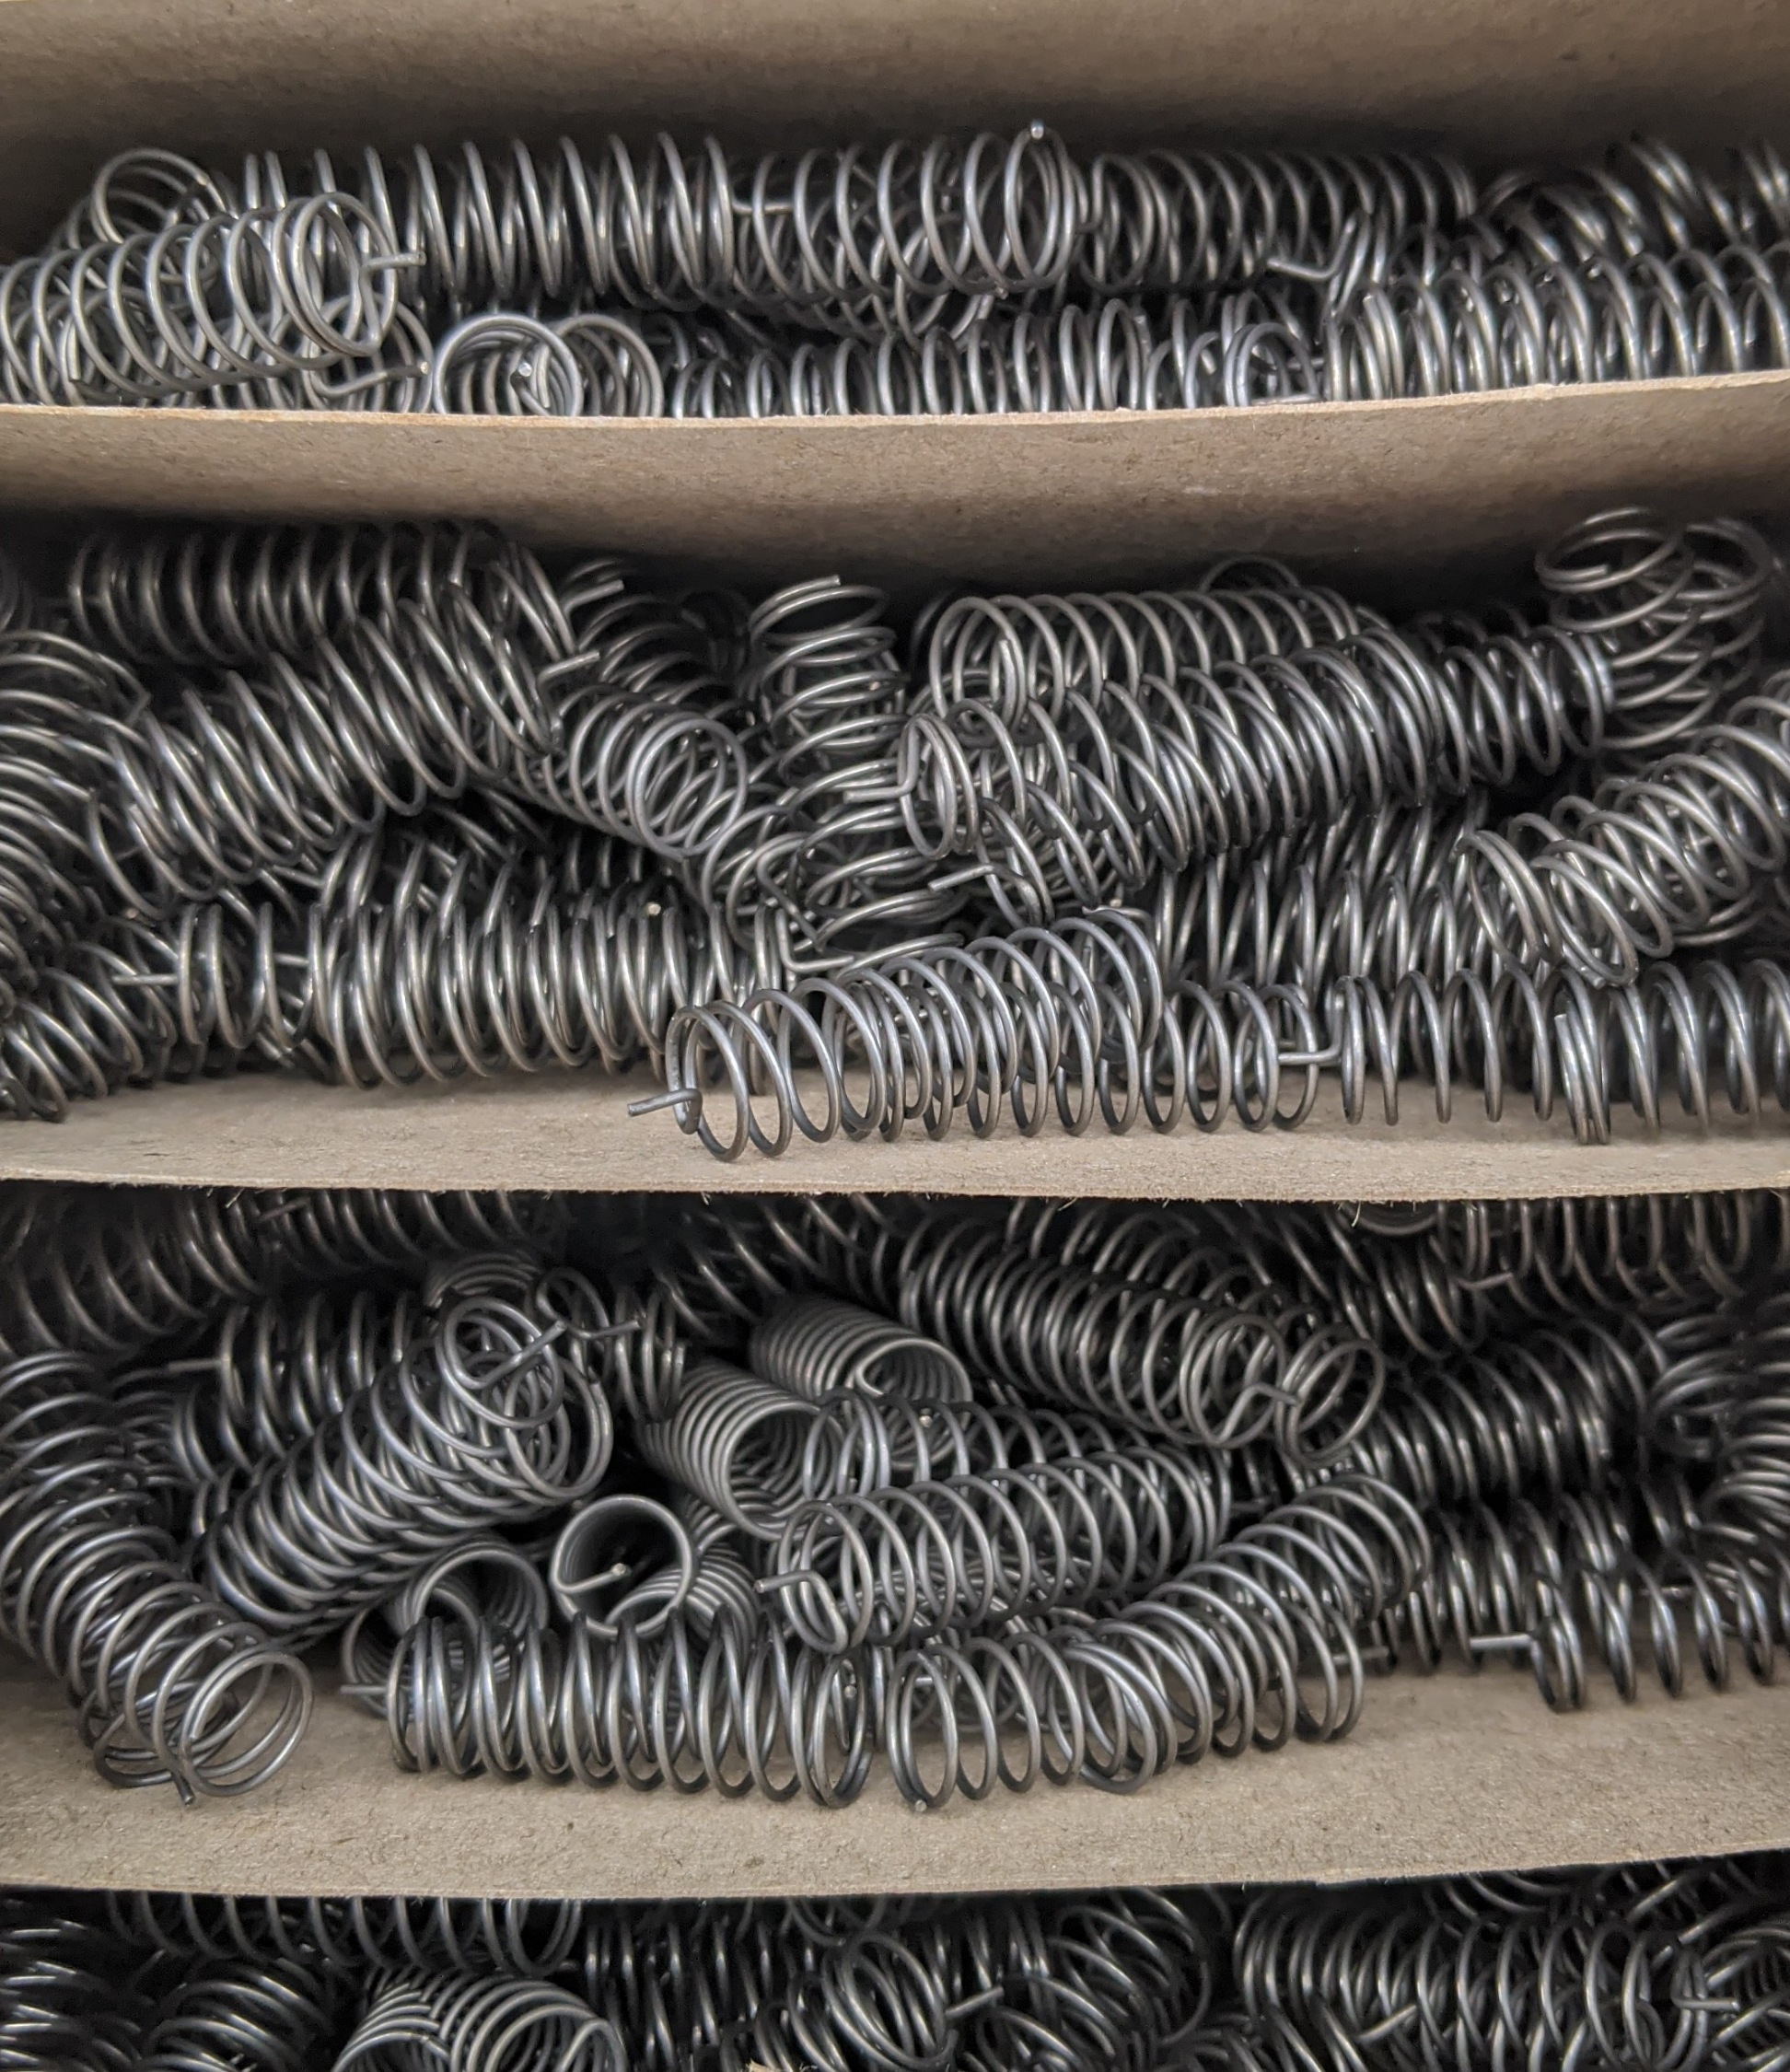 Multiple springs layer-packed to minimize tangling